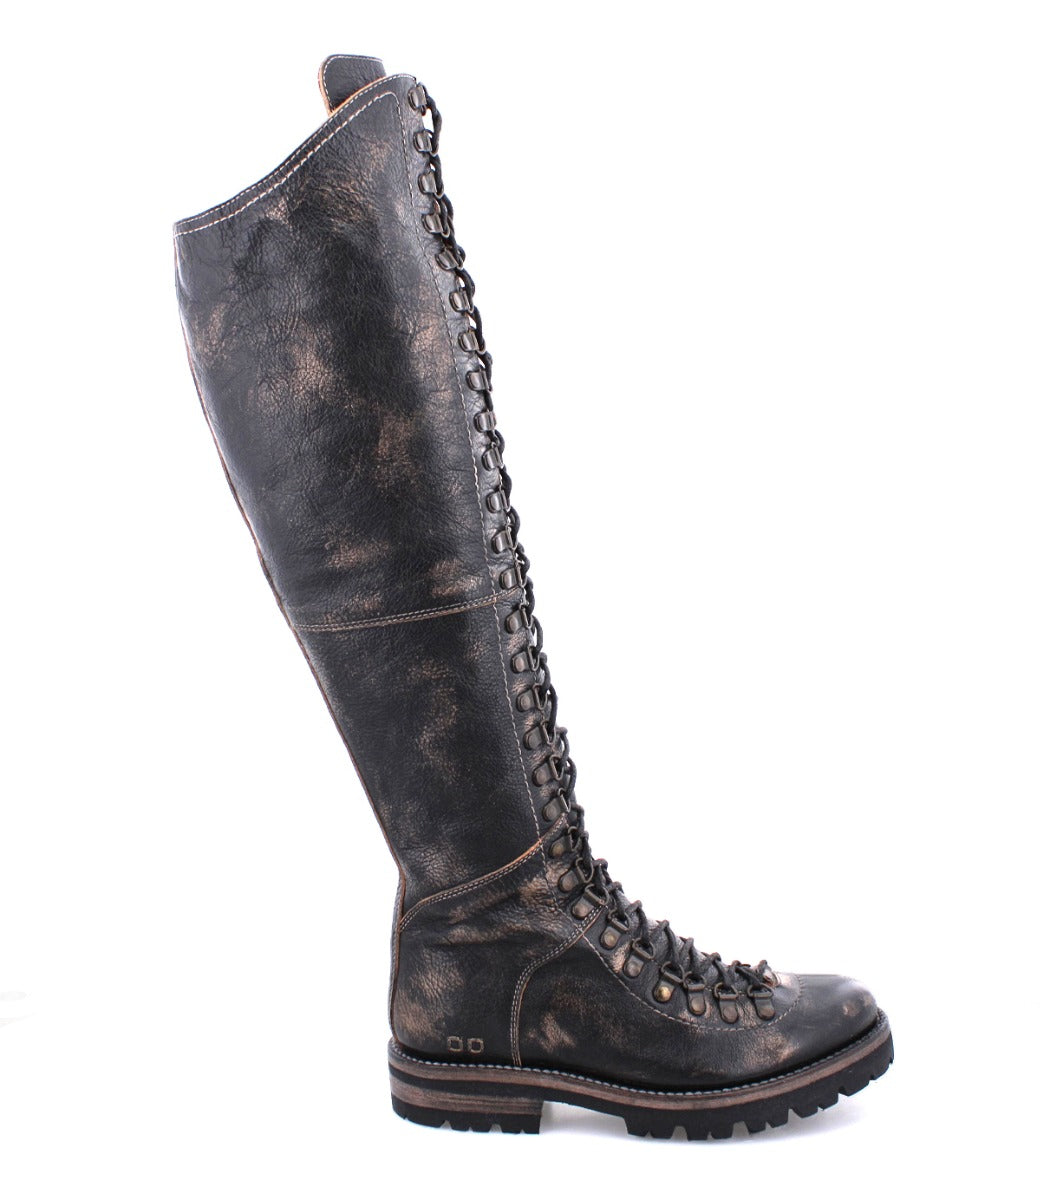 A women's Lustrous black leather boot with laces from Bed Stu.